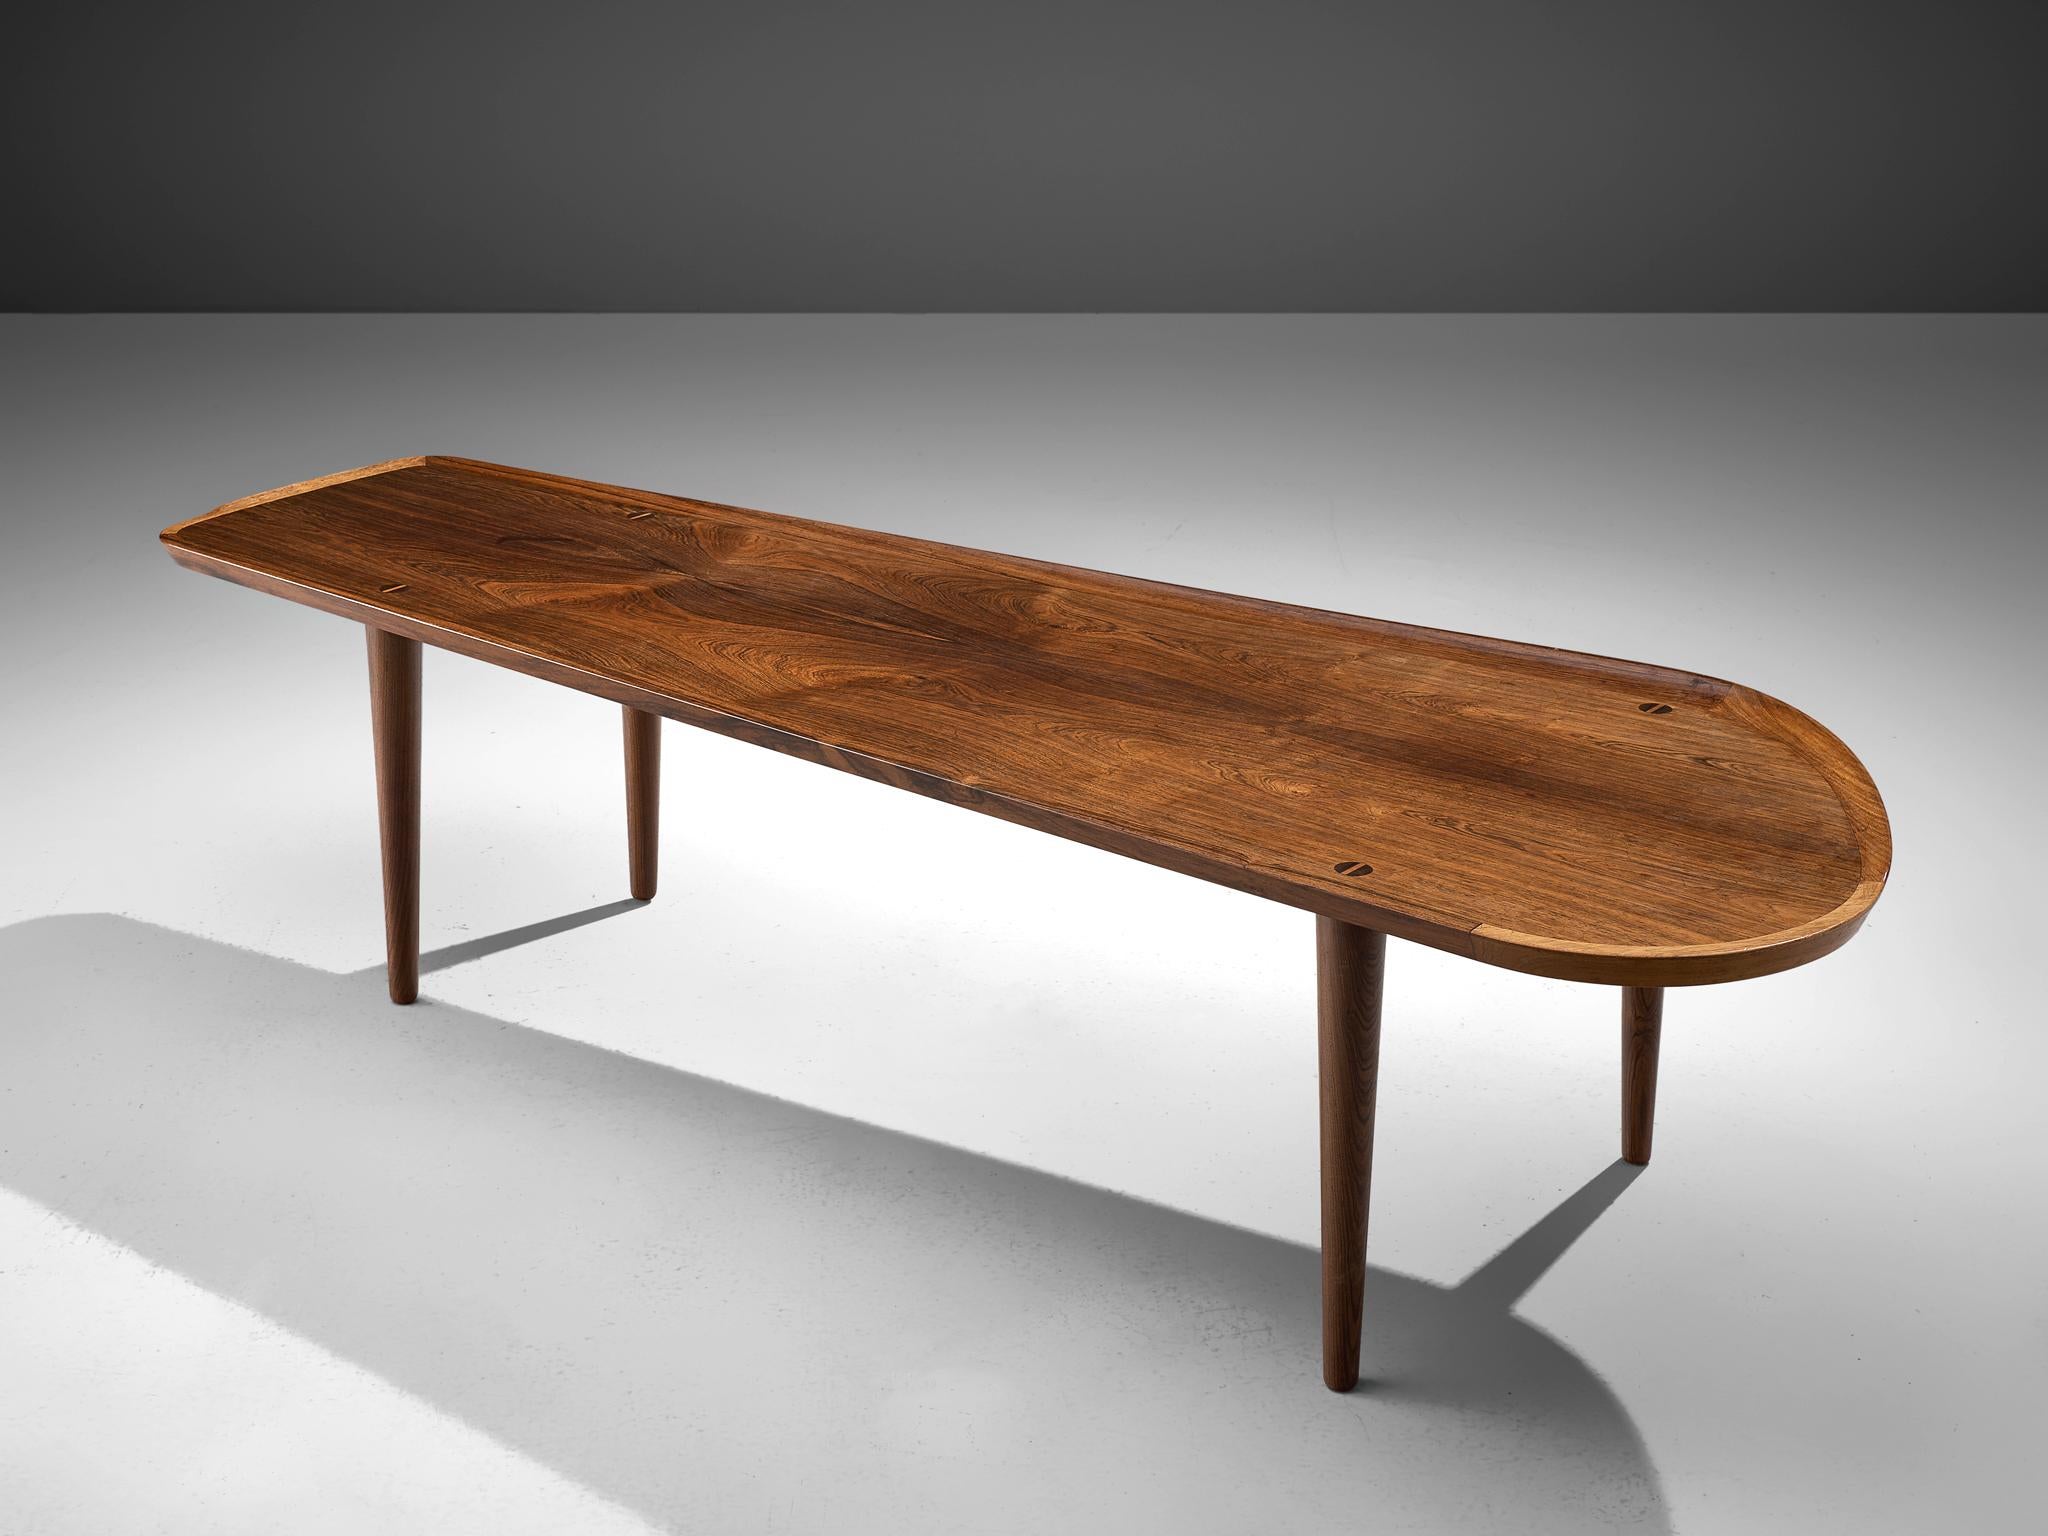 Freeform rosewood coffee table, Denmark, 1960s by the known designer Arne Hovmand-Olsen.

This organically shaped coffee table is well made in rosewood, and shows elegant details and outstanding craftsmanship. The upstanding edge of the top is